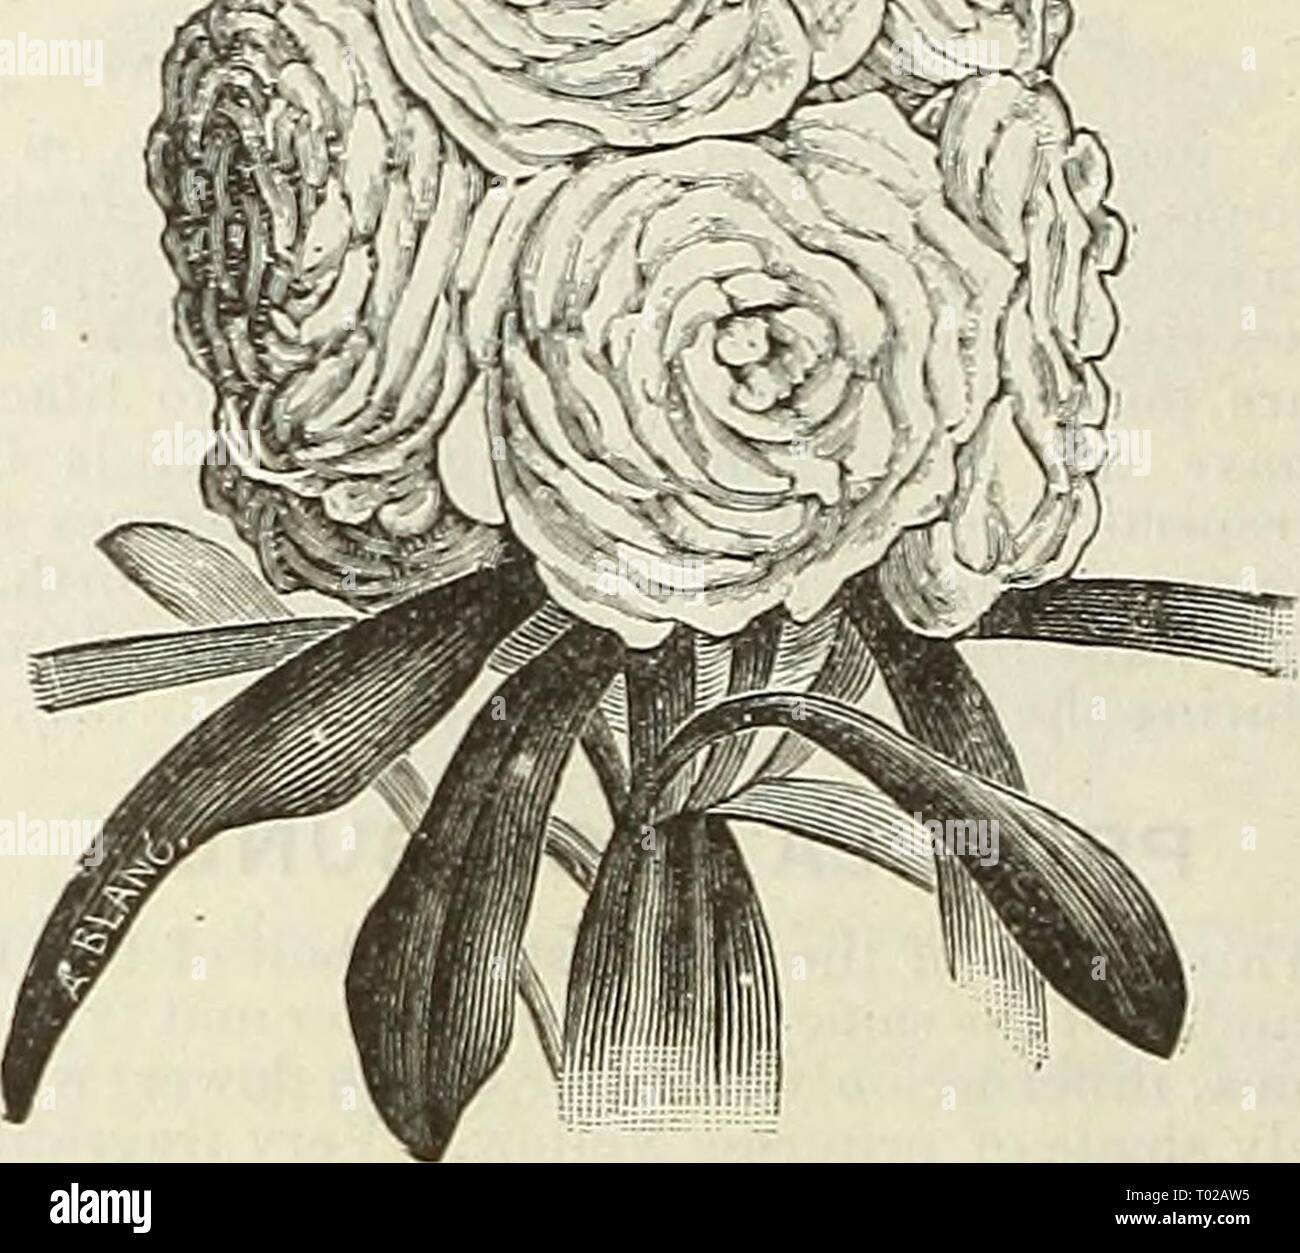 Dreer's garden calendar : 1889 . dreersgardencale1889henr Year: 1889  SILENE. (Catch-Fly.) A beautiful, early, free-blooining plant, adapted for beds, borders, or ribbon-gardenina:; of easy culture, grow- ing in any garden soil; hardy annual; 1 foot. PER PKT. 6560 Armeria Mixed. Red, white, and rose. Per oz., 6U cts 5 6.557 Pendula Flore Pleno. Producing charming double rose-colored flowers in profusion a.. 10 SMILAX. (See Myrsiphyllum Asparagoides.) SNAP DRAGON (See Antirrhinum). San-italia. Schizakthus. SANVITALIA. A valuable dwarf bedding plant; fine for rockeries, etc. ; flowers during th Stock Photo